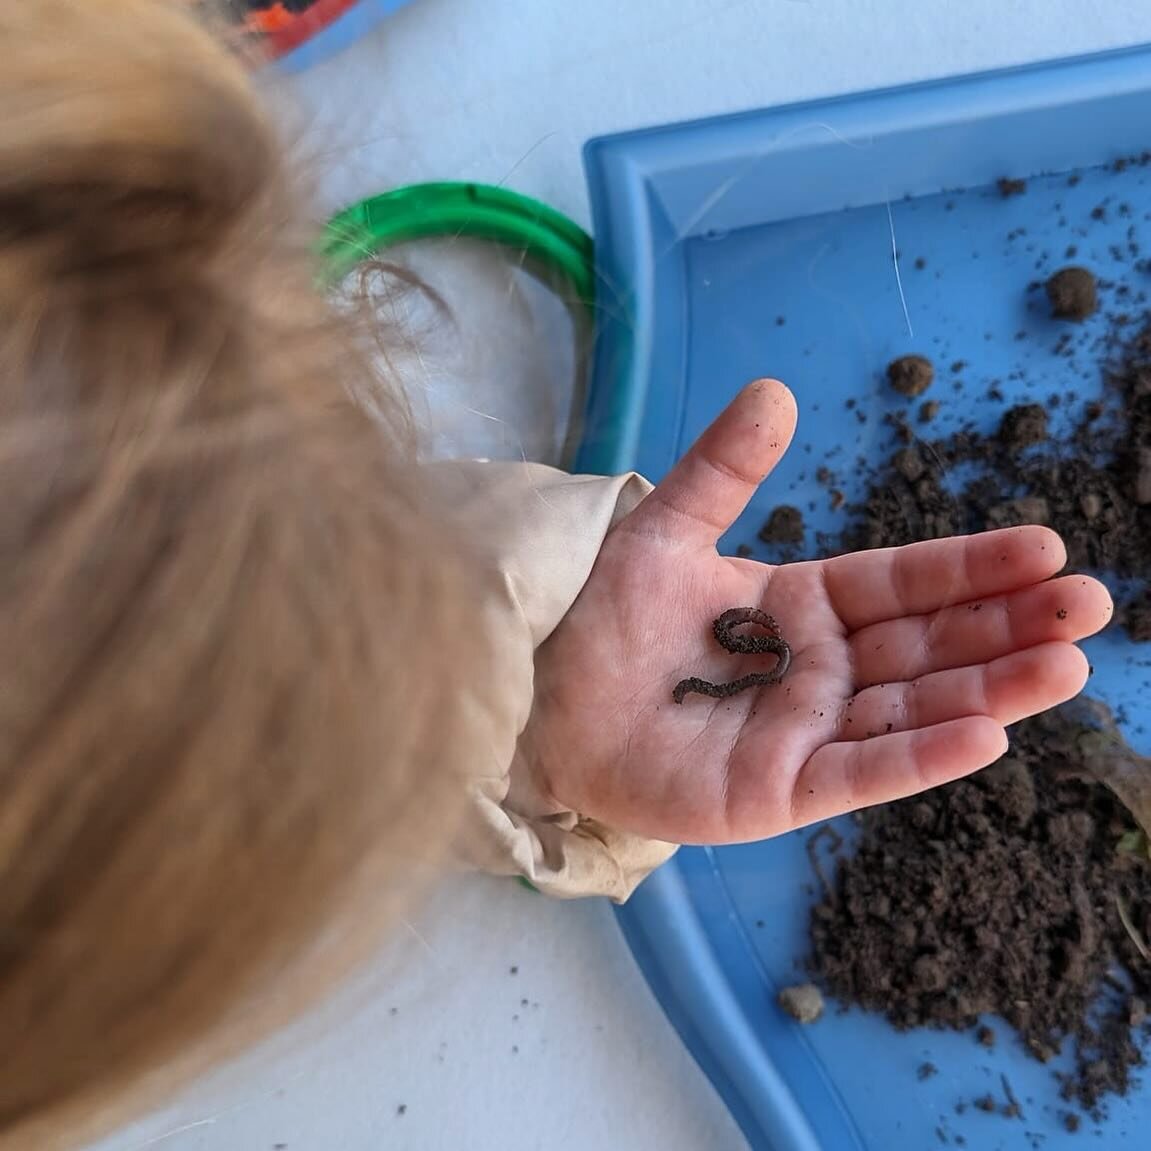 🌱🐛🌷 Dive into the wonders of nature with our little learners! From wriggling worms to the magic of metamorphosis, our classes are buzzing with excitement as we explore the marvels of the natural world. 

Gardening, observing butterflies, and getti